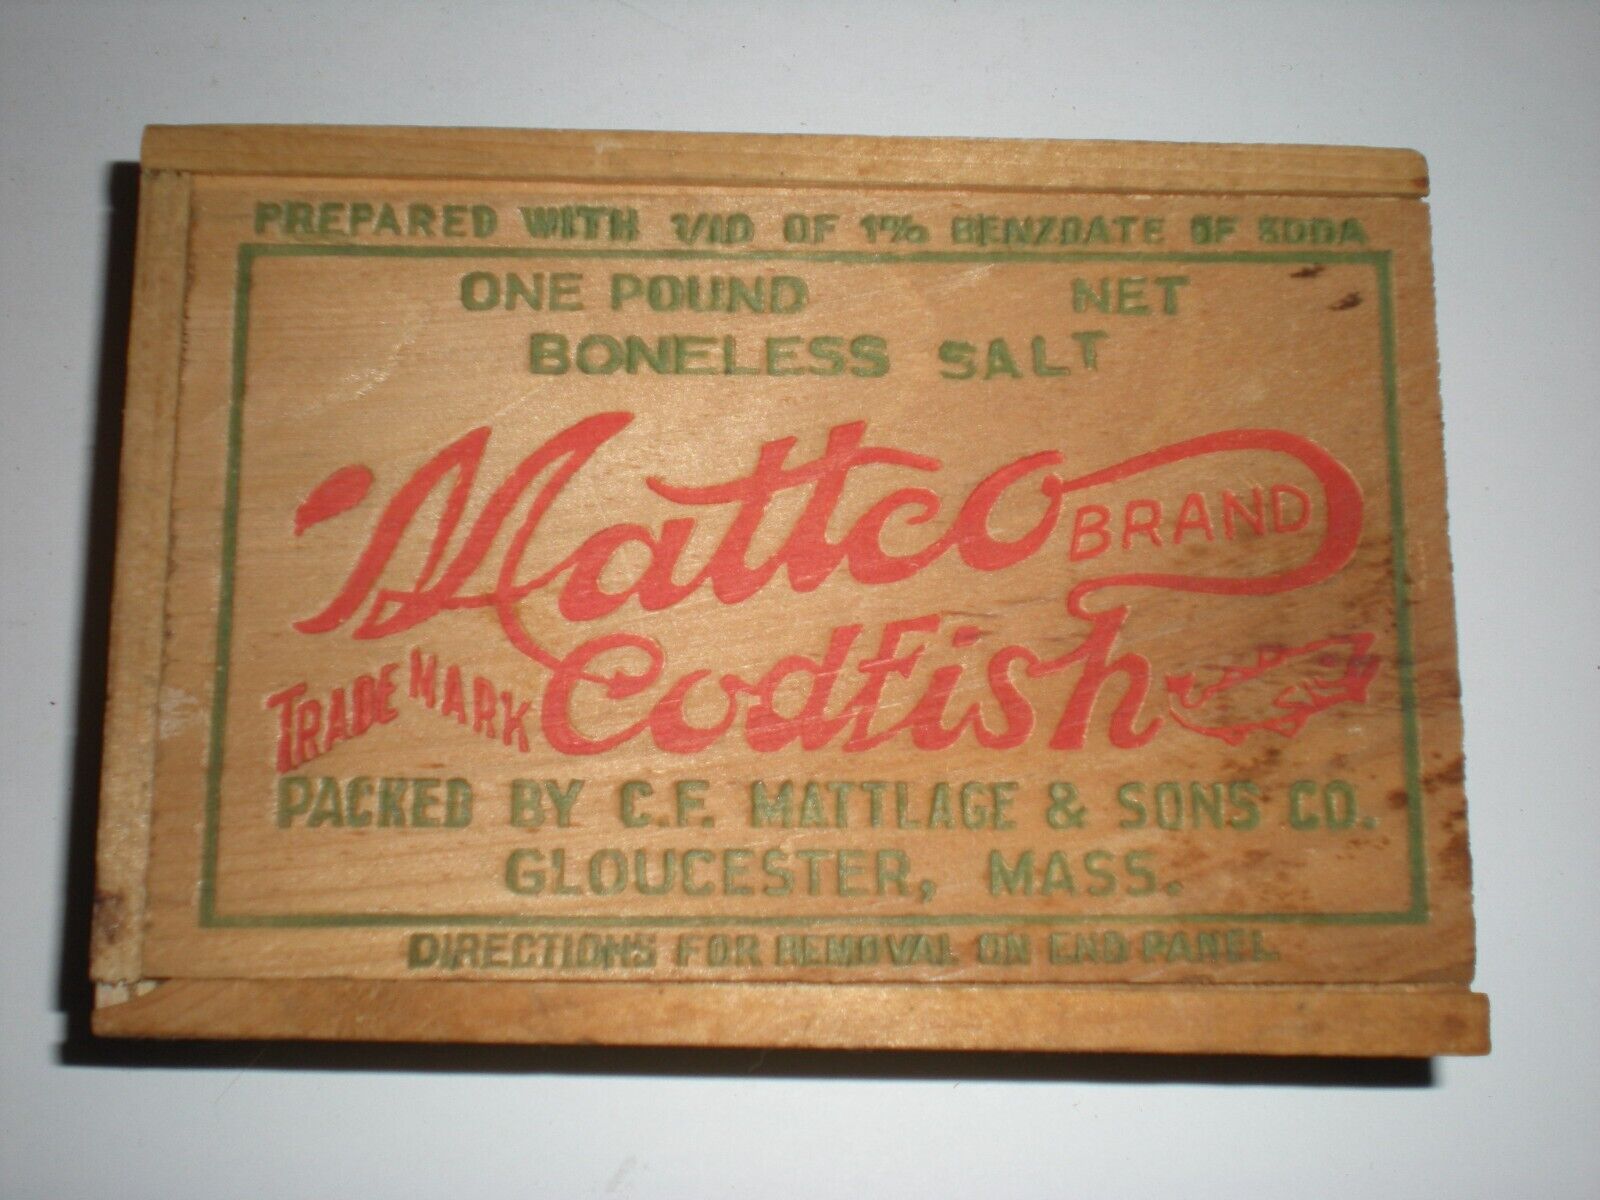 Antique vtg Wooden Mattco Codfish Advertising Finger Jointed/Dovetail Side Box